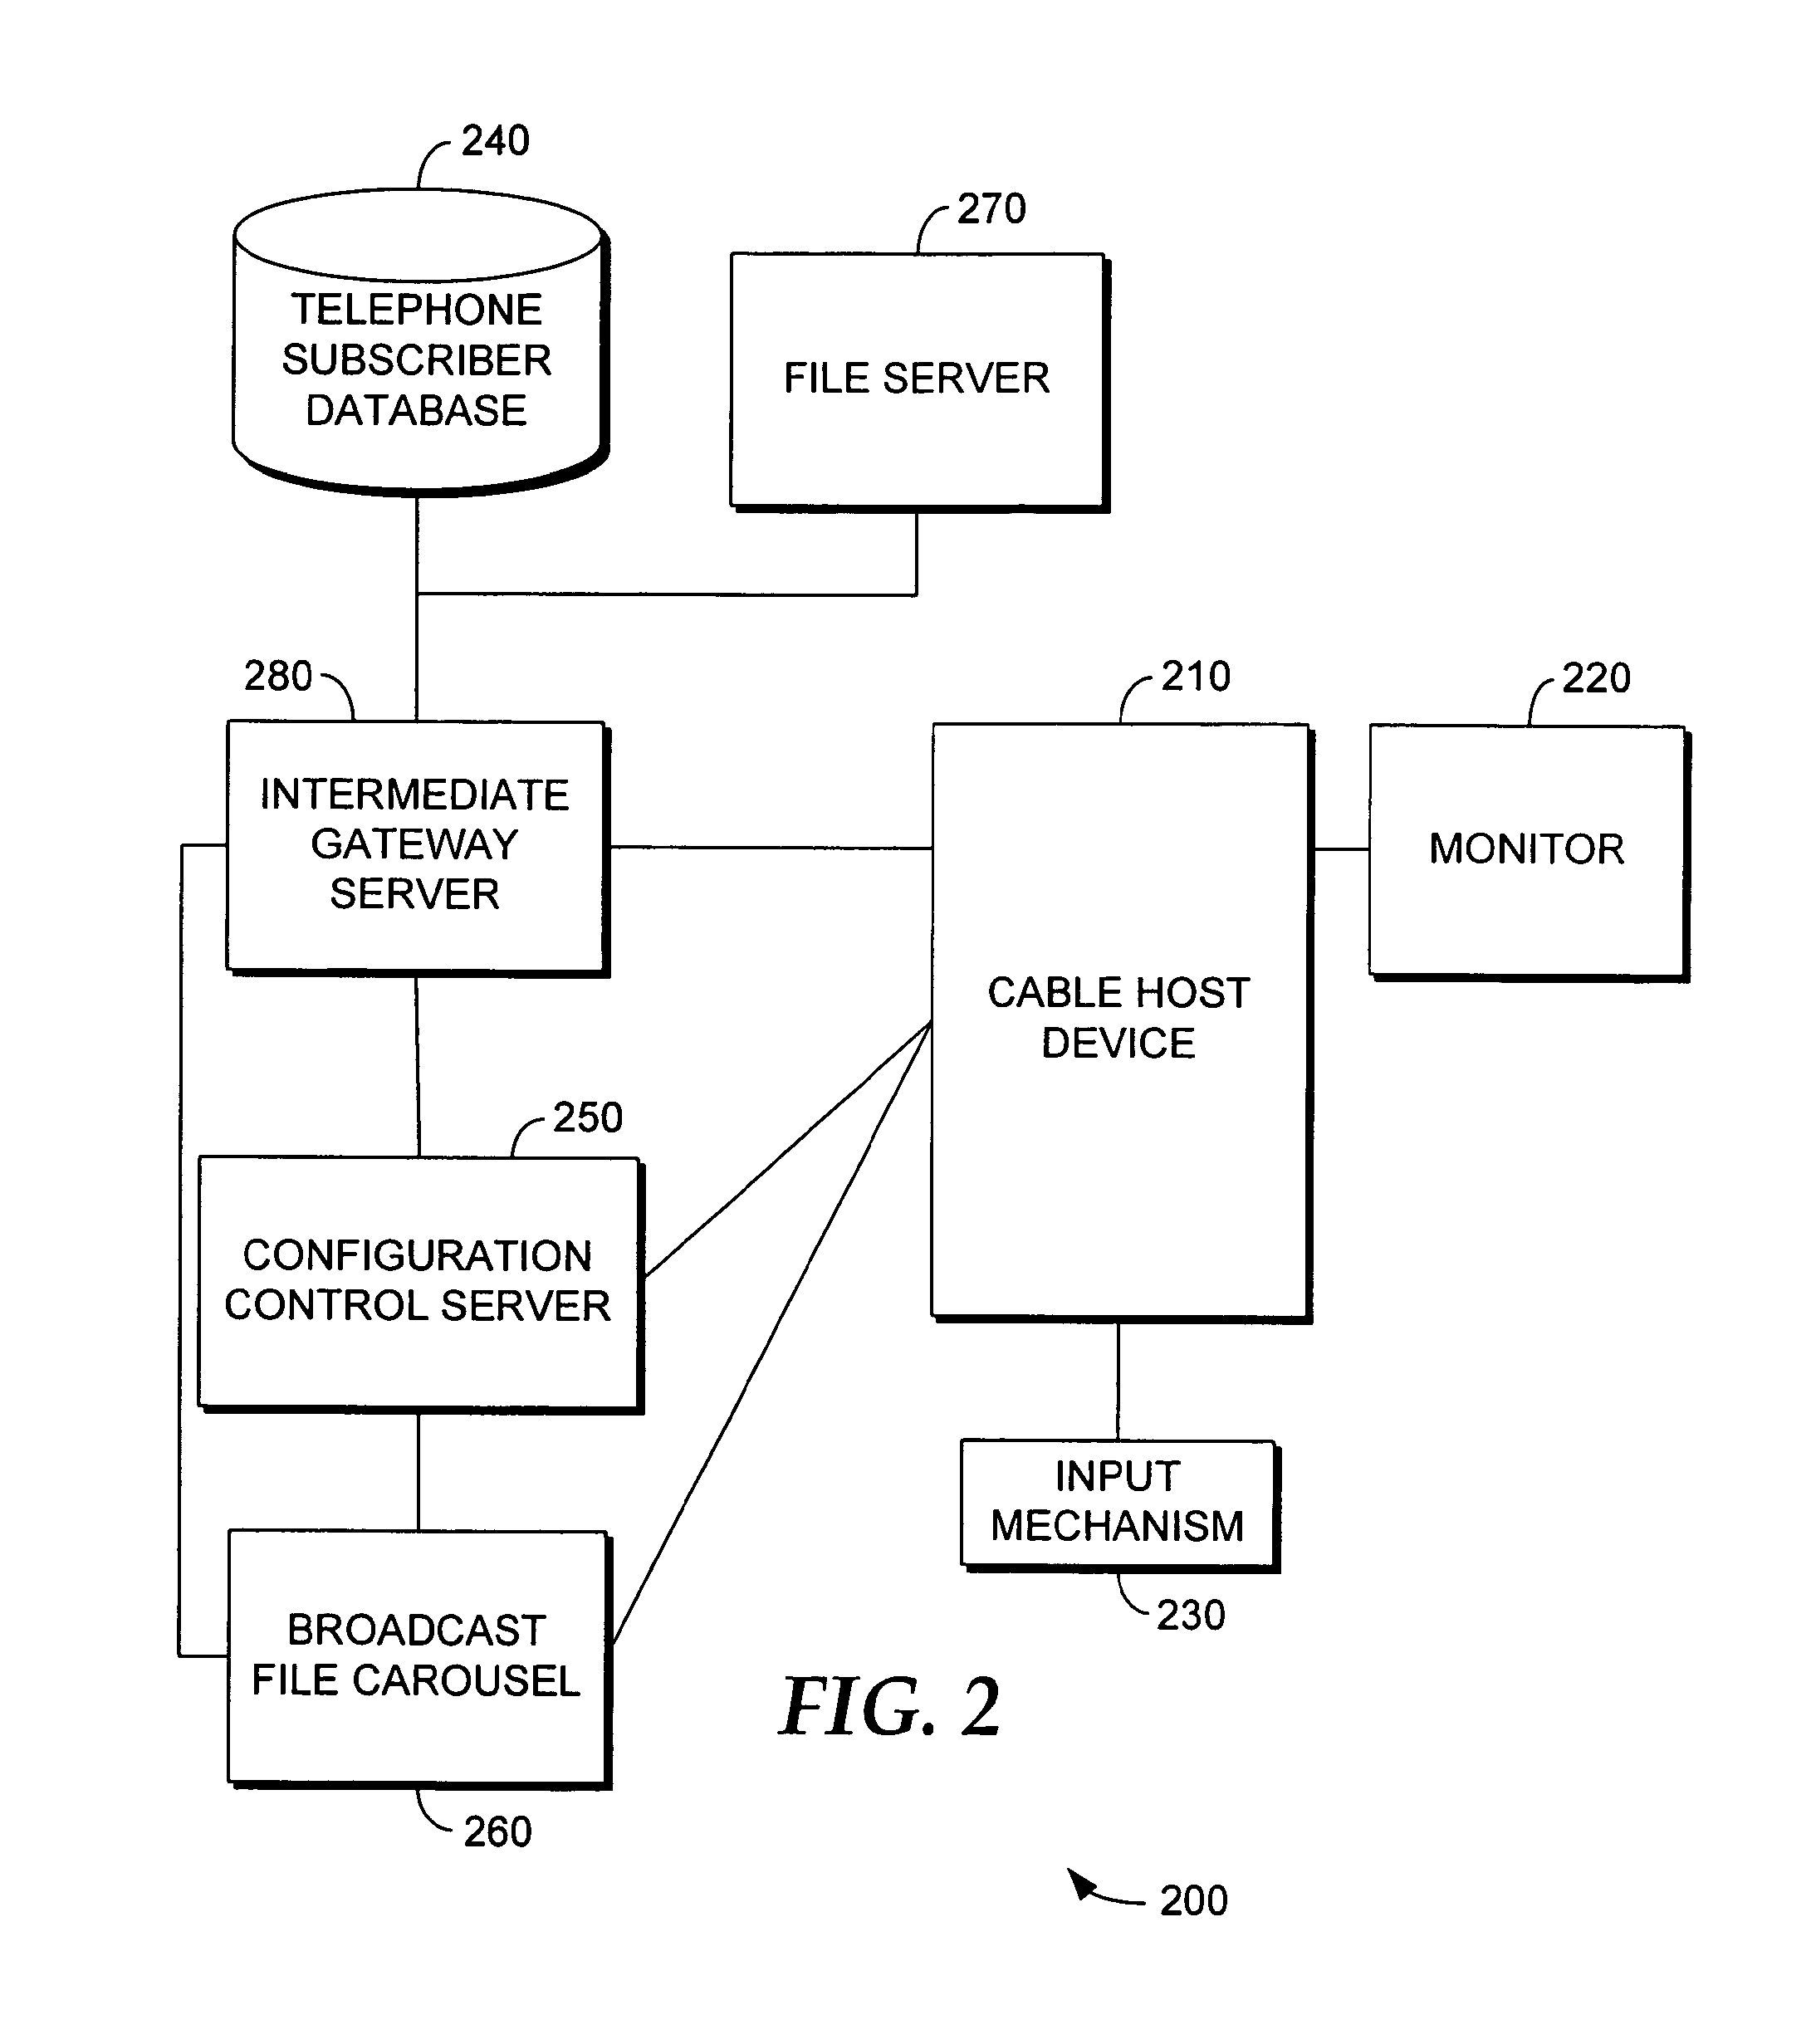 System and method to provide services from a communication network to a media-delivery network via a host device connected to the media-delivery network